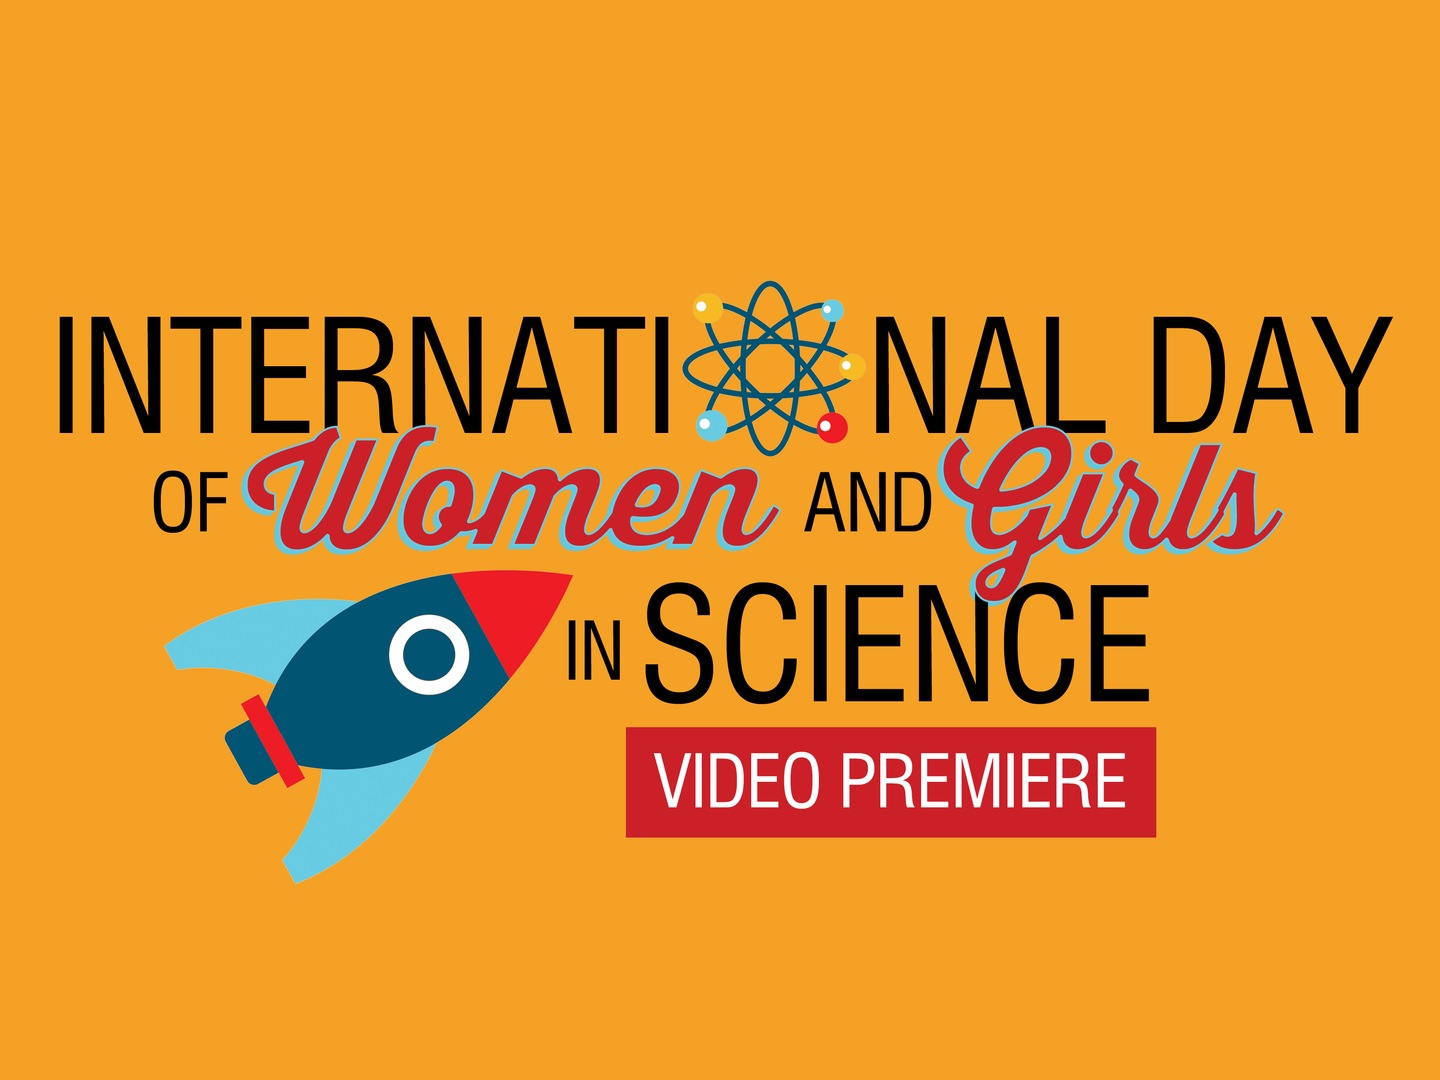 Video Premiere International Day Of Women And Girls In Science The